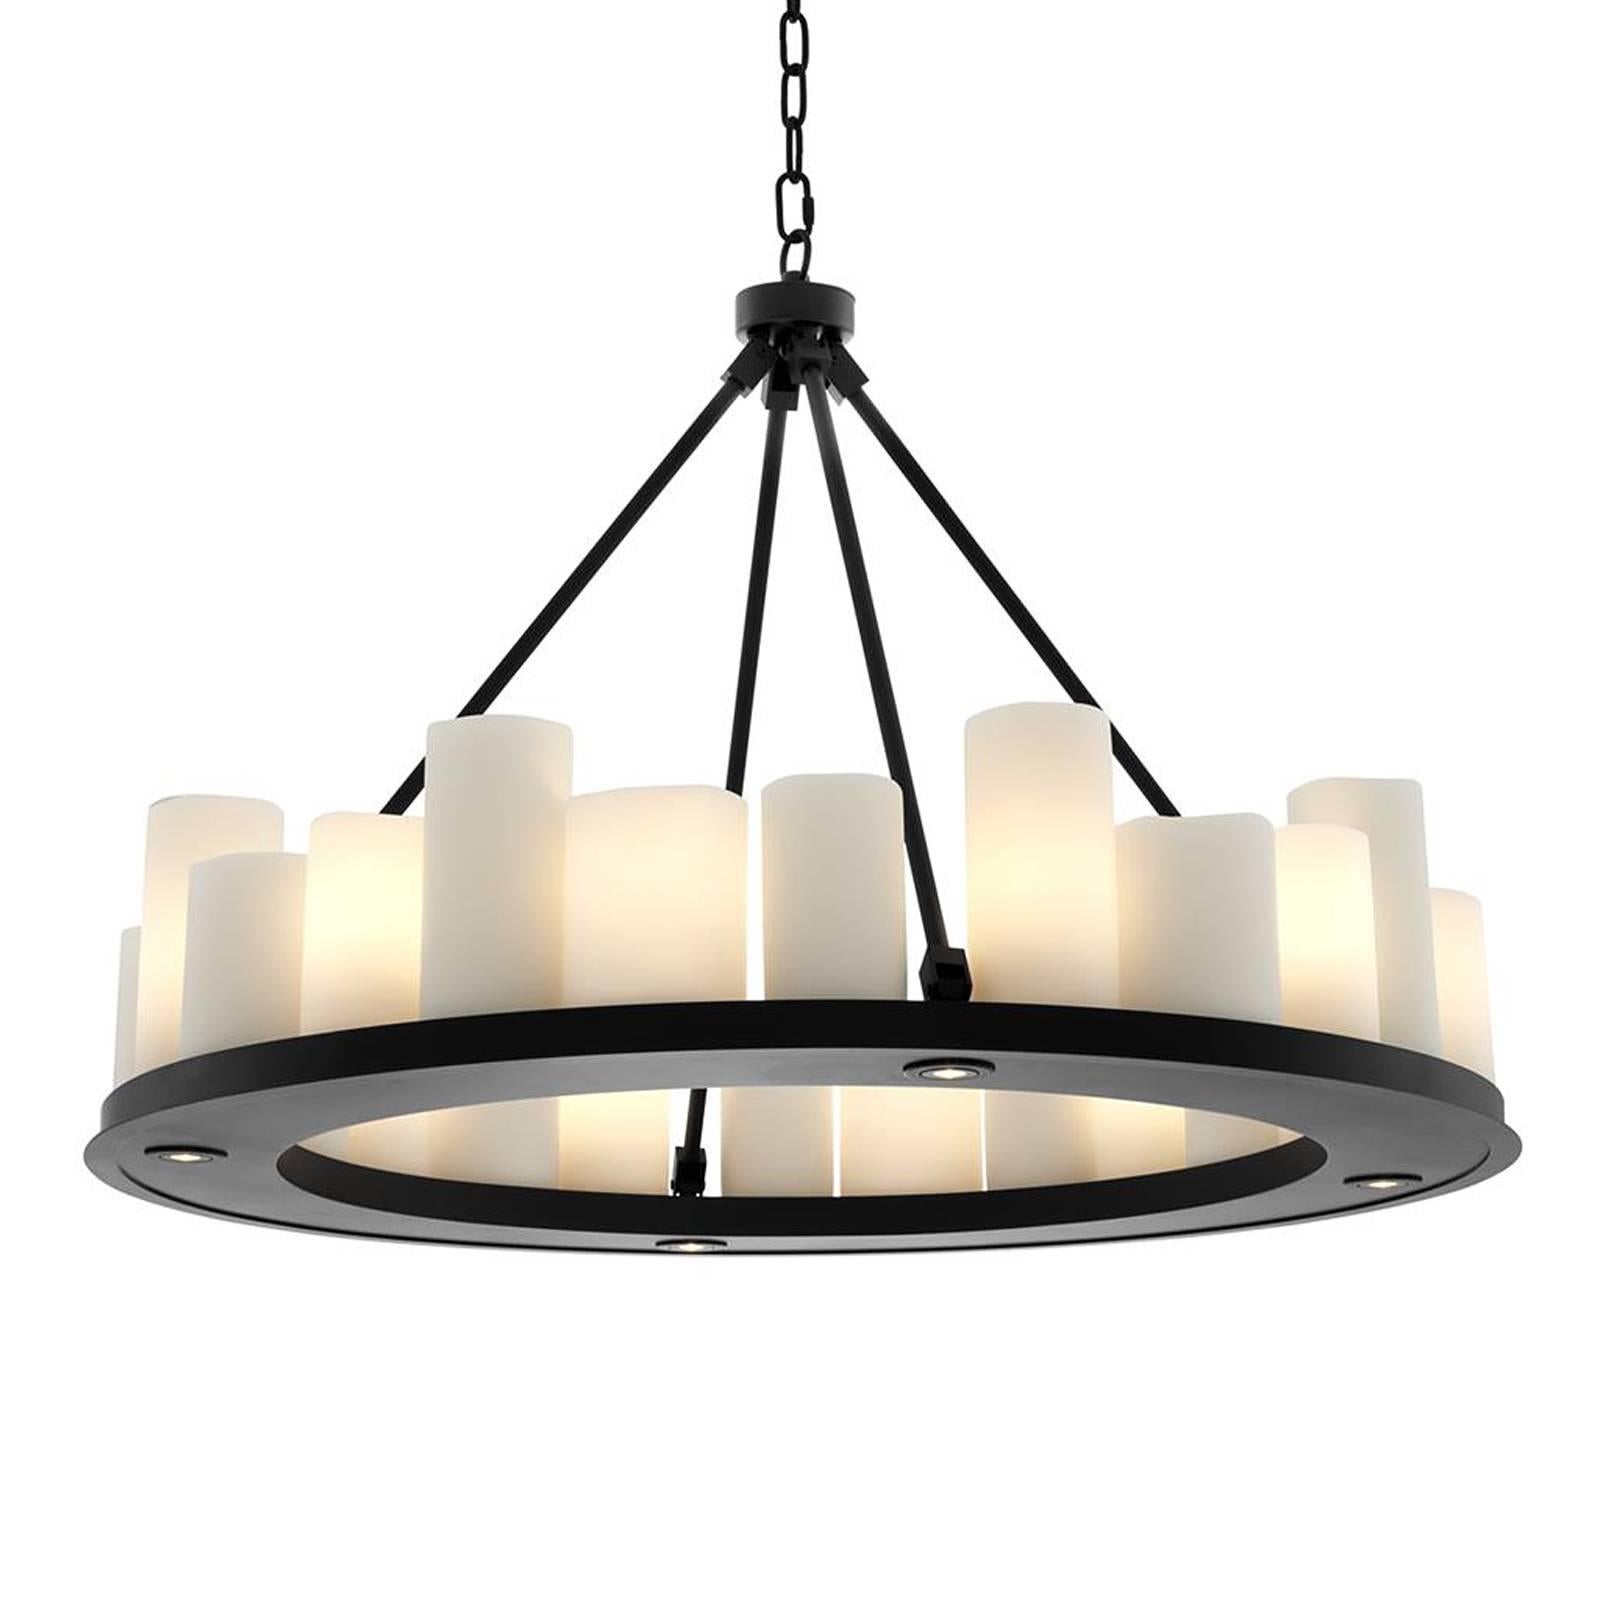 Chinese Candle LED Light Chandelier in Black Finish